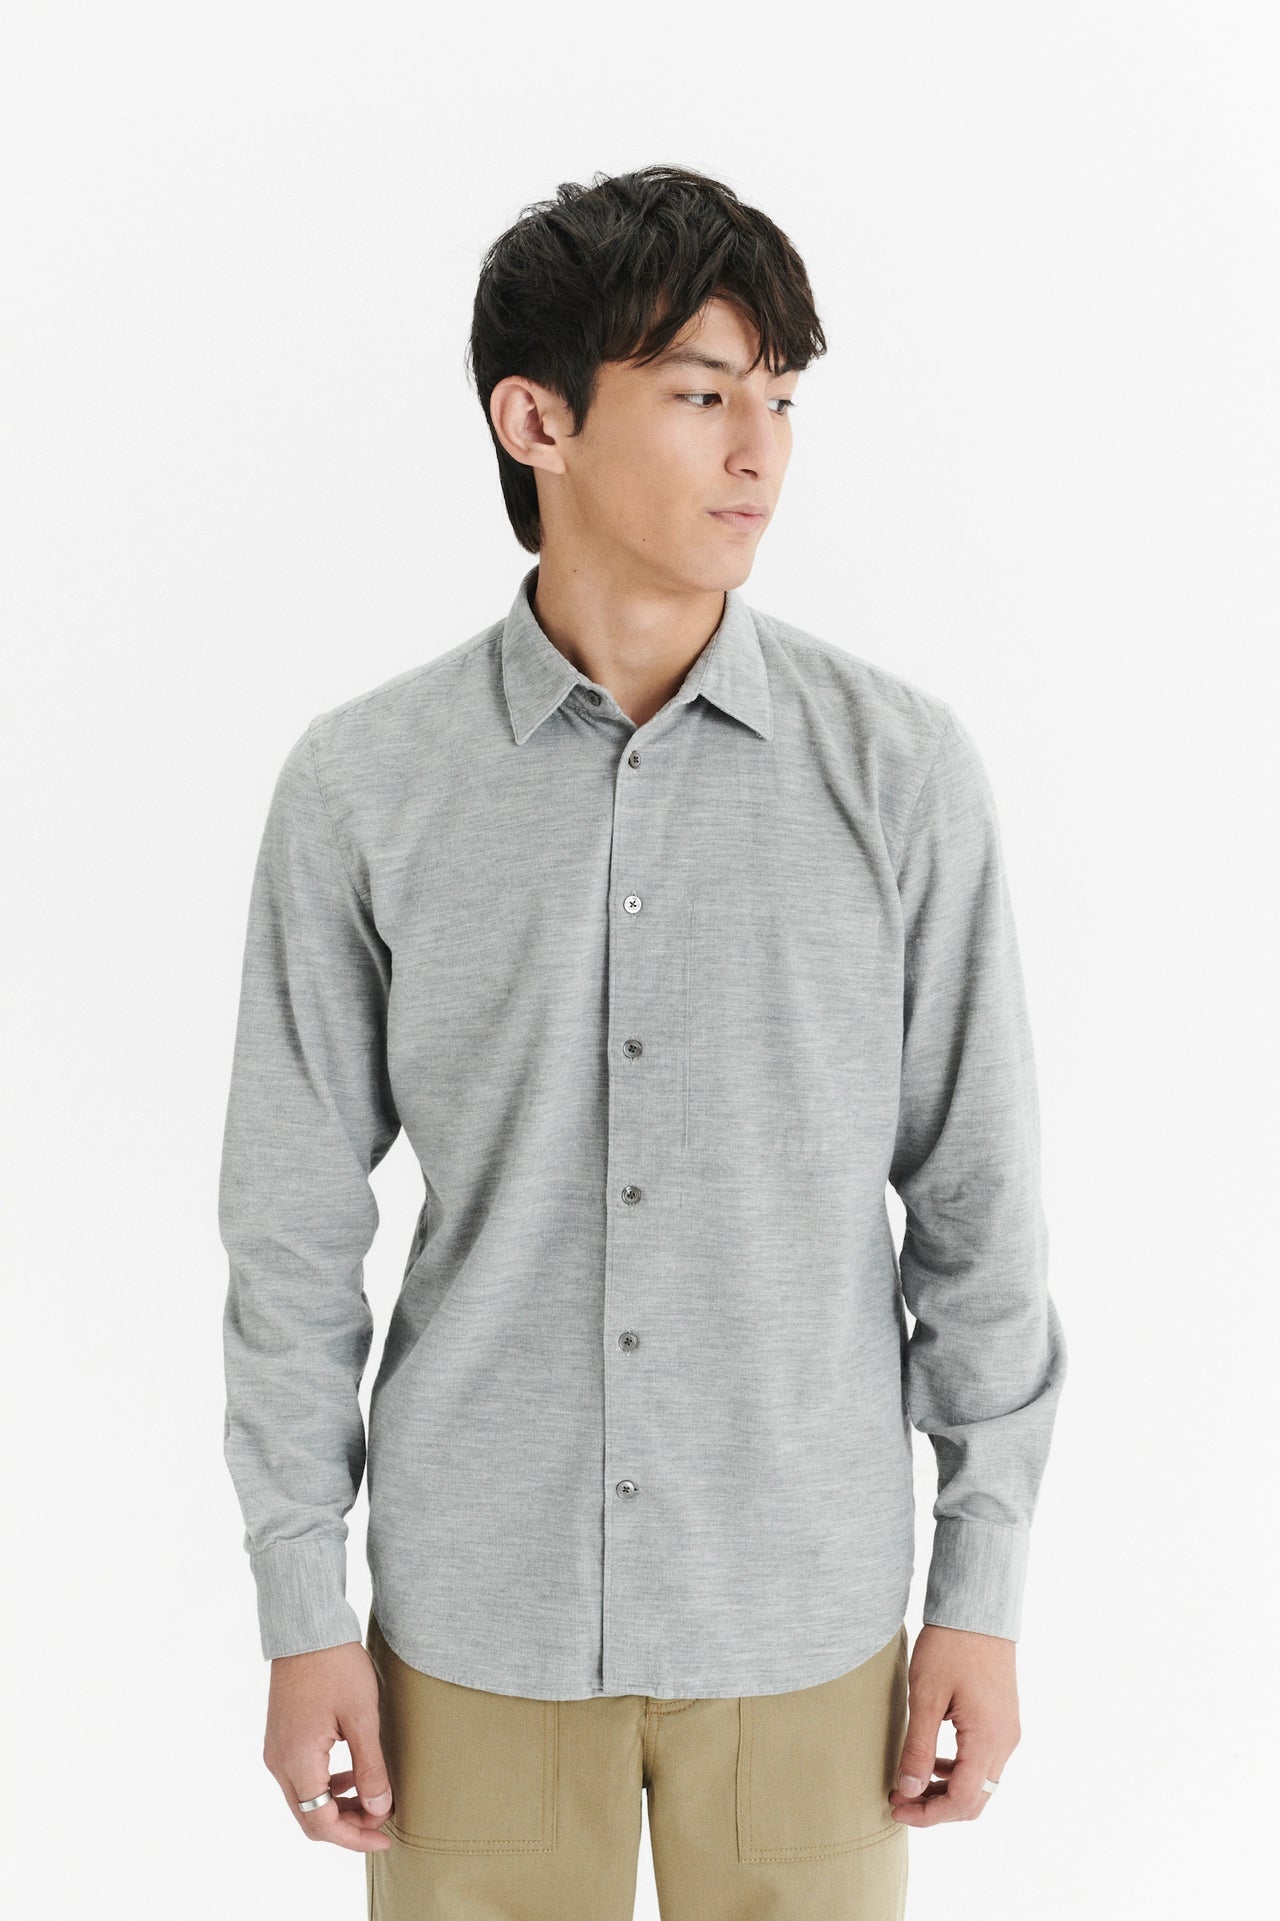 Feel Good Shirt in a Grey Japanese Soft Corduroy Cotton